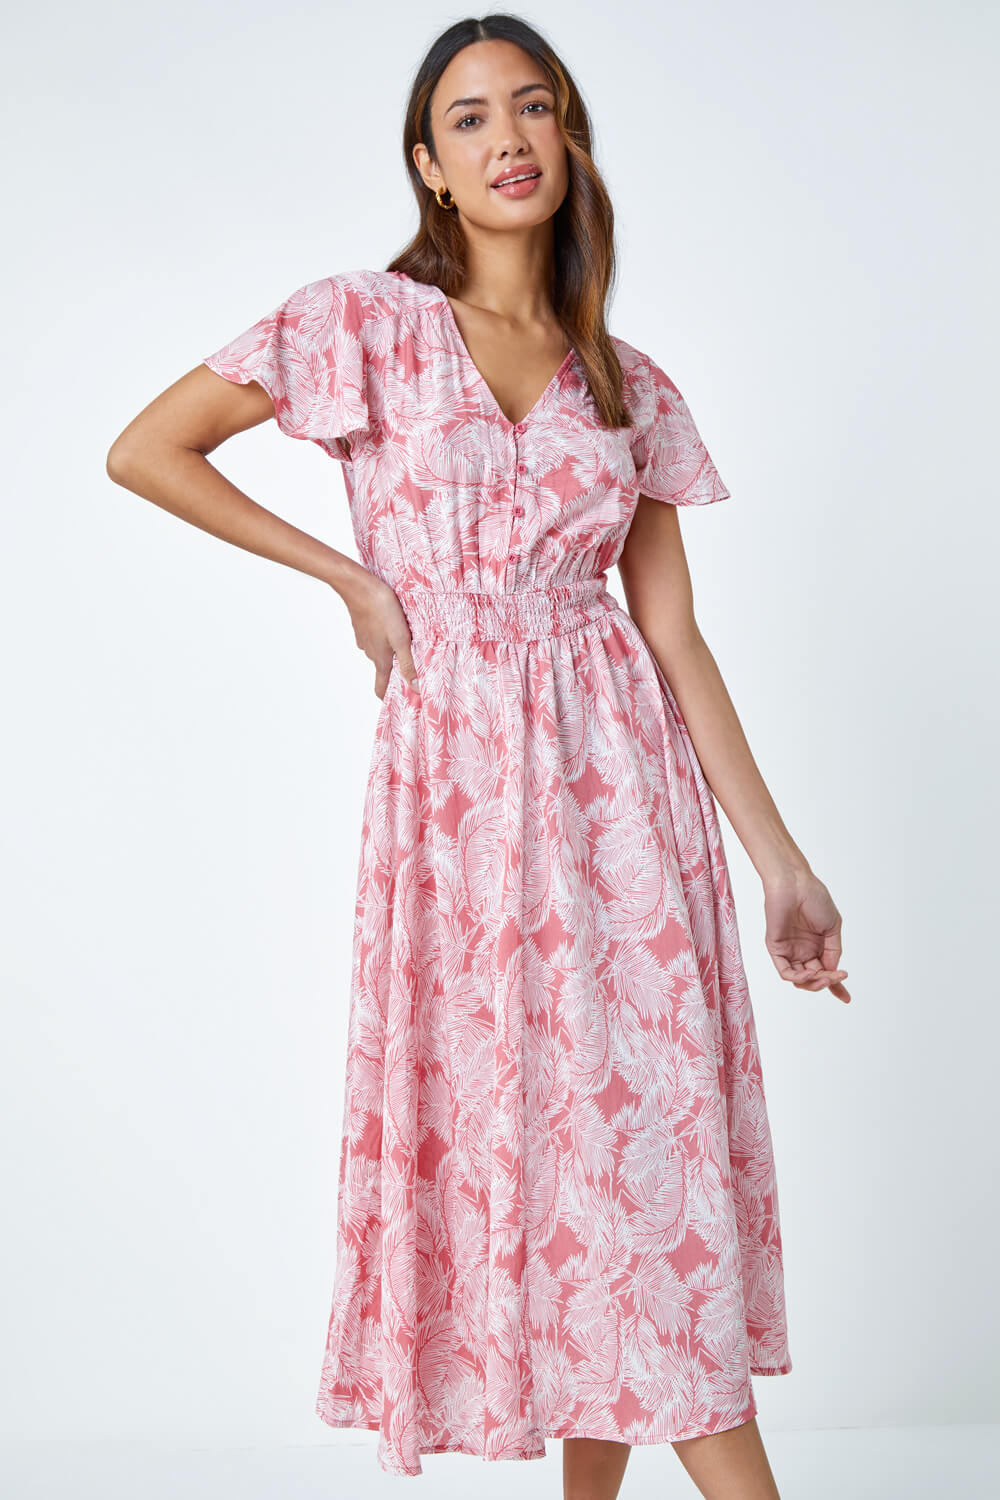 CORAL Palm Print Tiered Midi Dress, Image 2 of 5